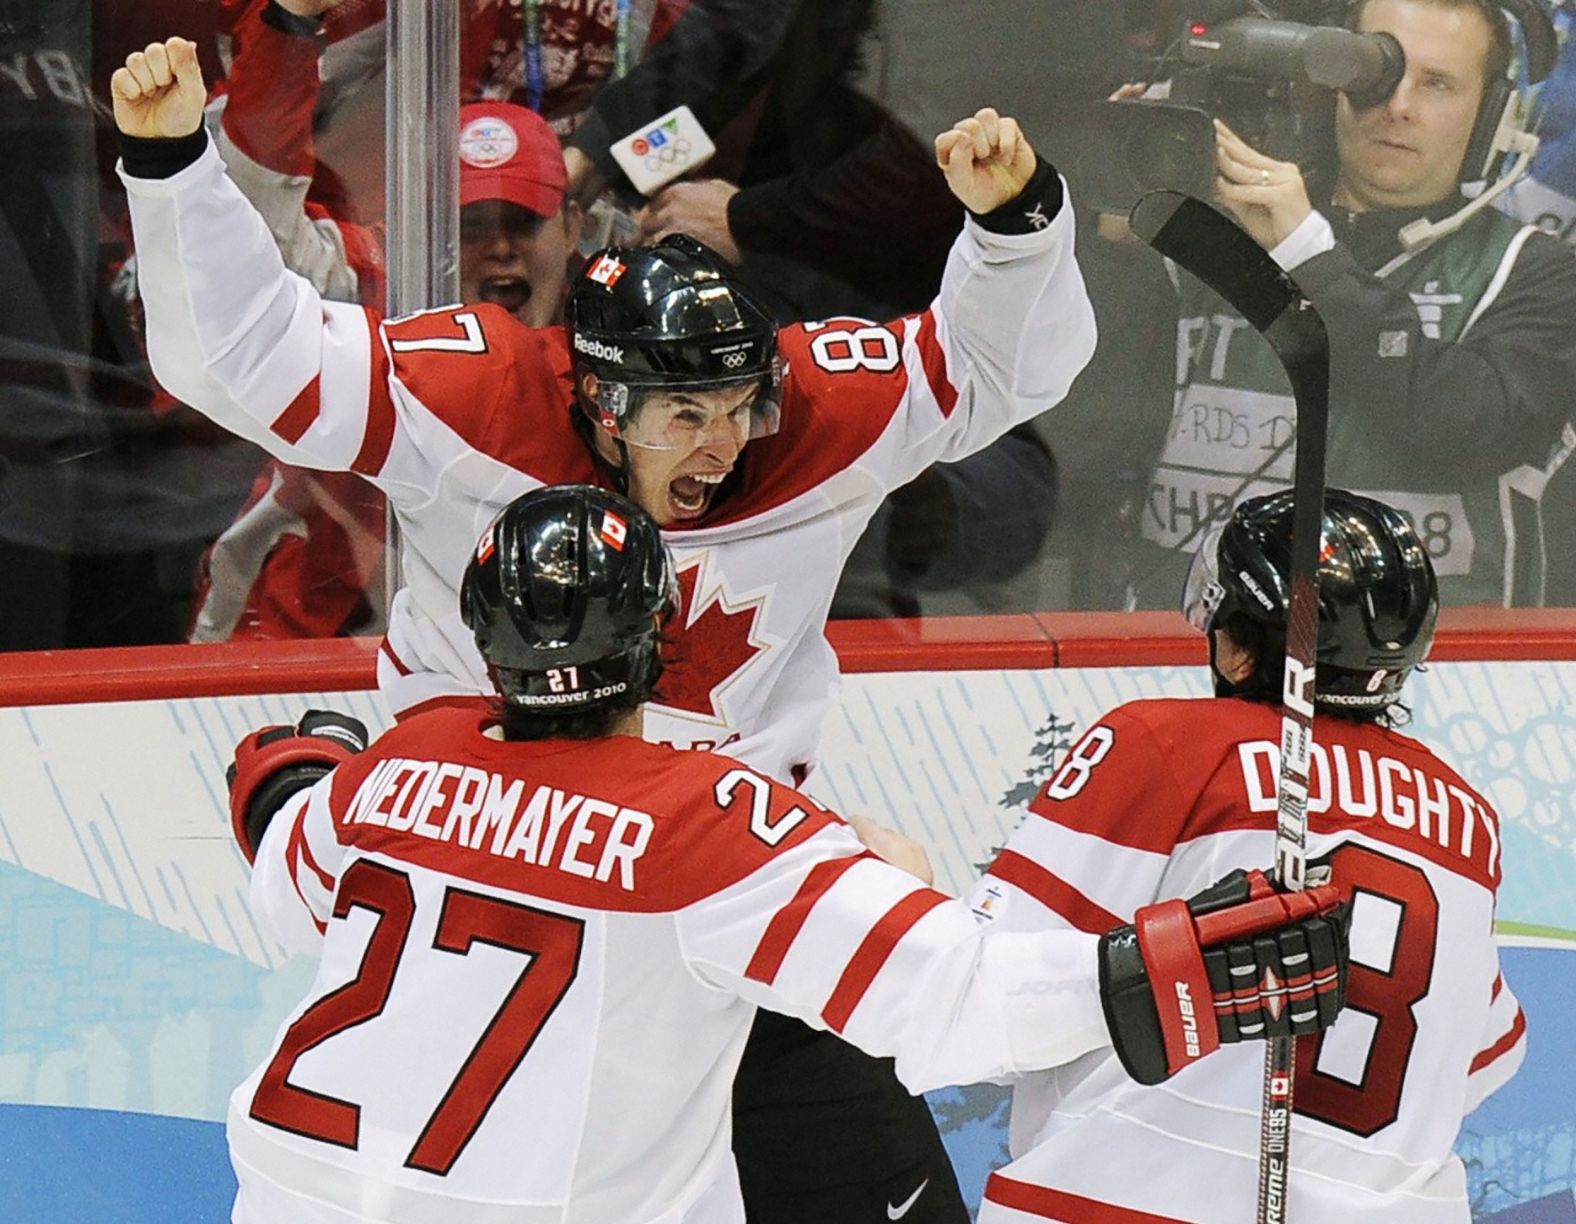 Canada is a proud hockey nation, and there was a lot of pressure on the men's team to win gold when the 2010 Games were held on home ice in Vancouver. That pressure built up even more when the gold-medal game between Canada and the United States went to sudden-death overtime. But Sidney Crosby came through in the clutch, scoring the "golden goal" to give the Canadians a dramatic 3-2 victory.